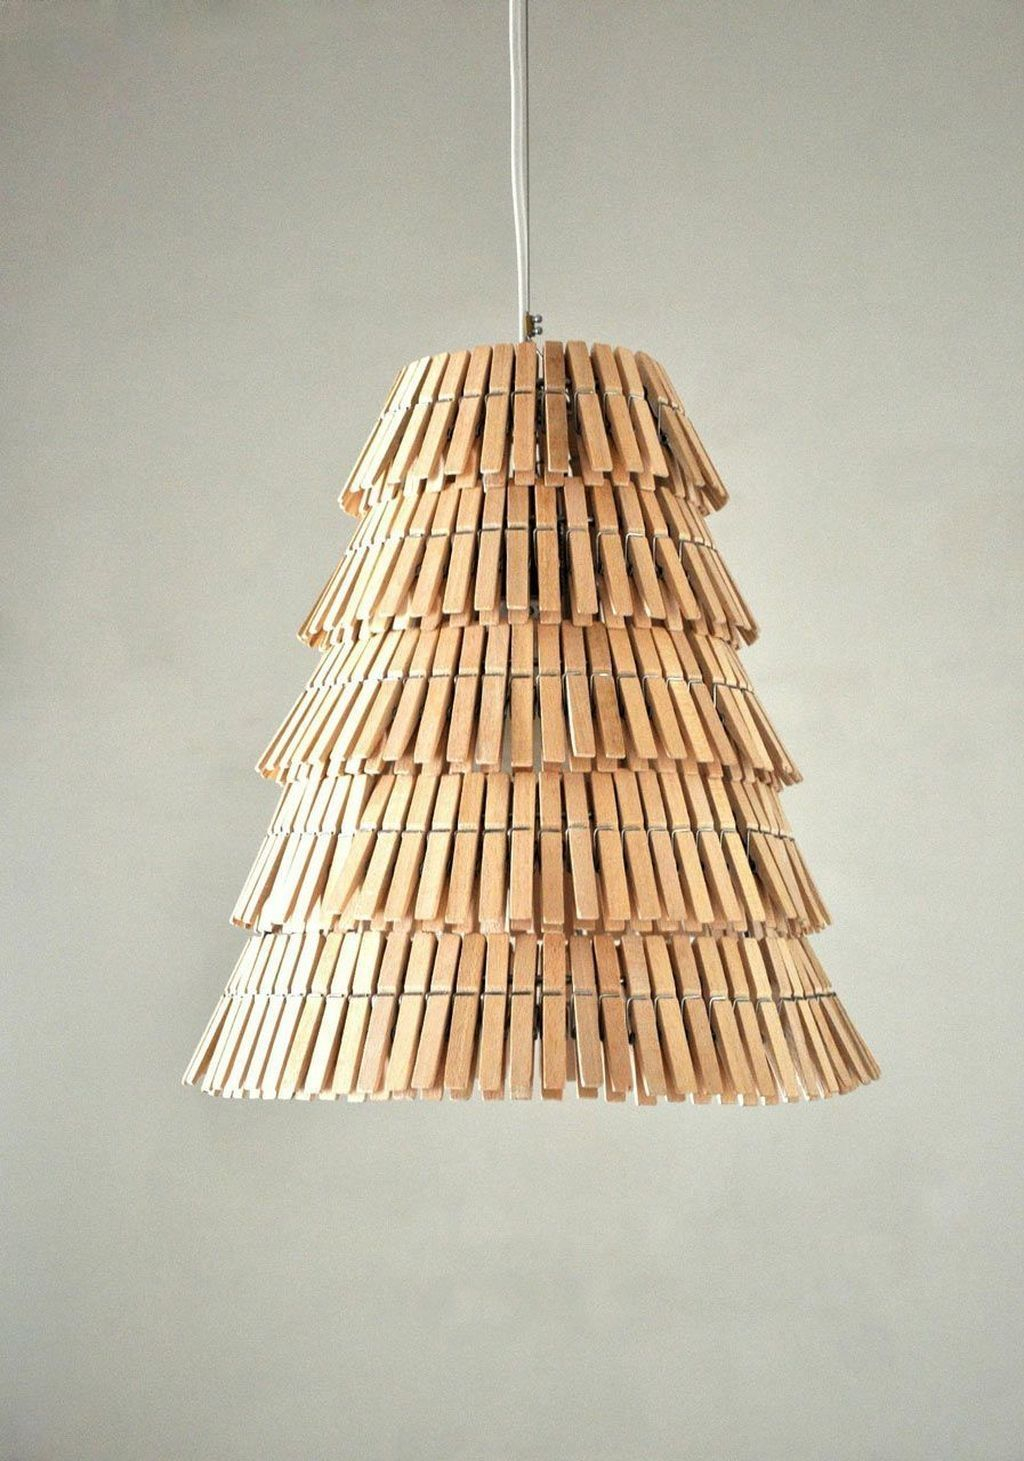 Wood clothespins pendant lamp Unconventional DIY Craft Ideas You Can Do With Wood Clothespins